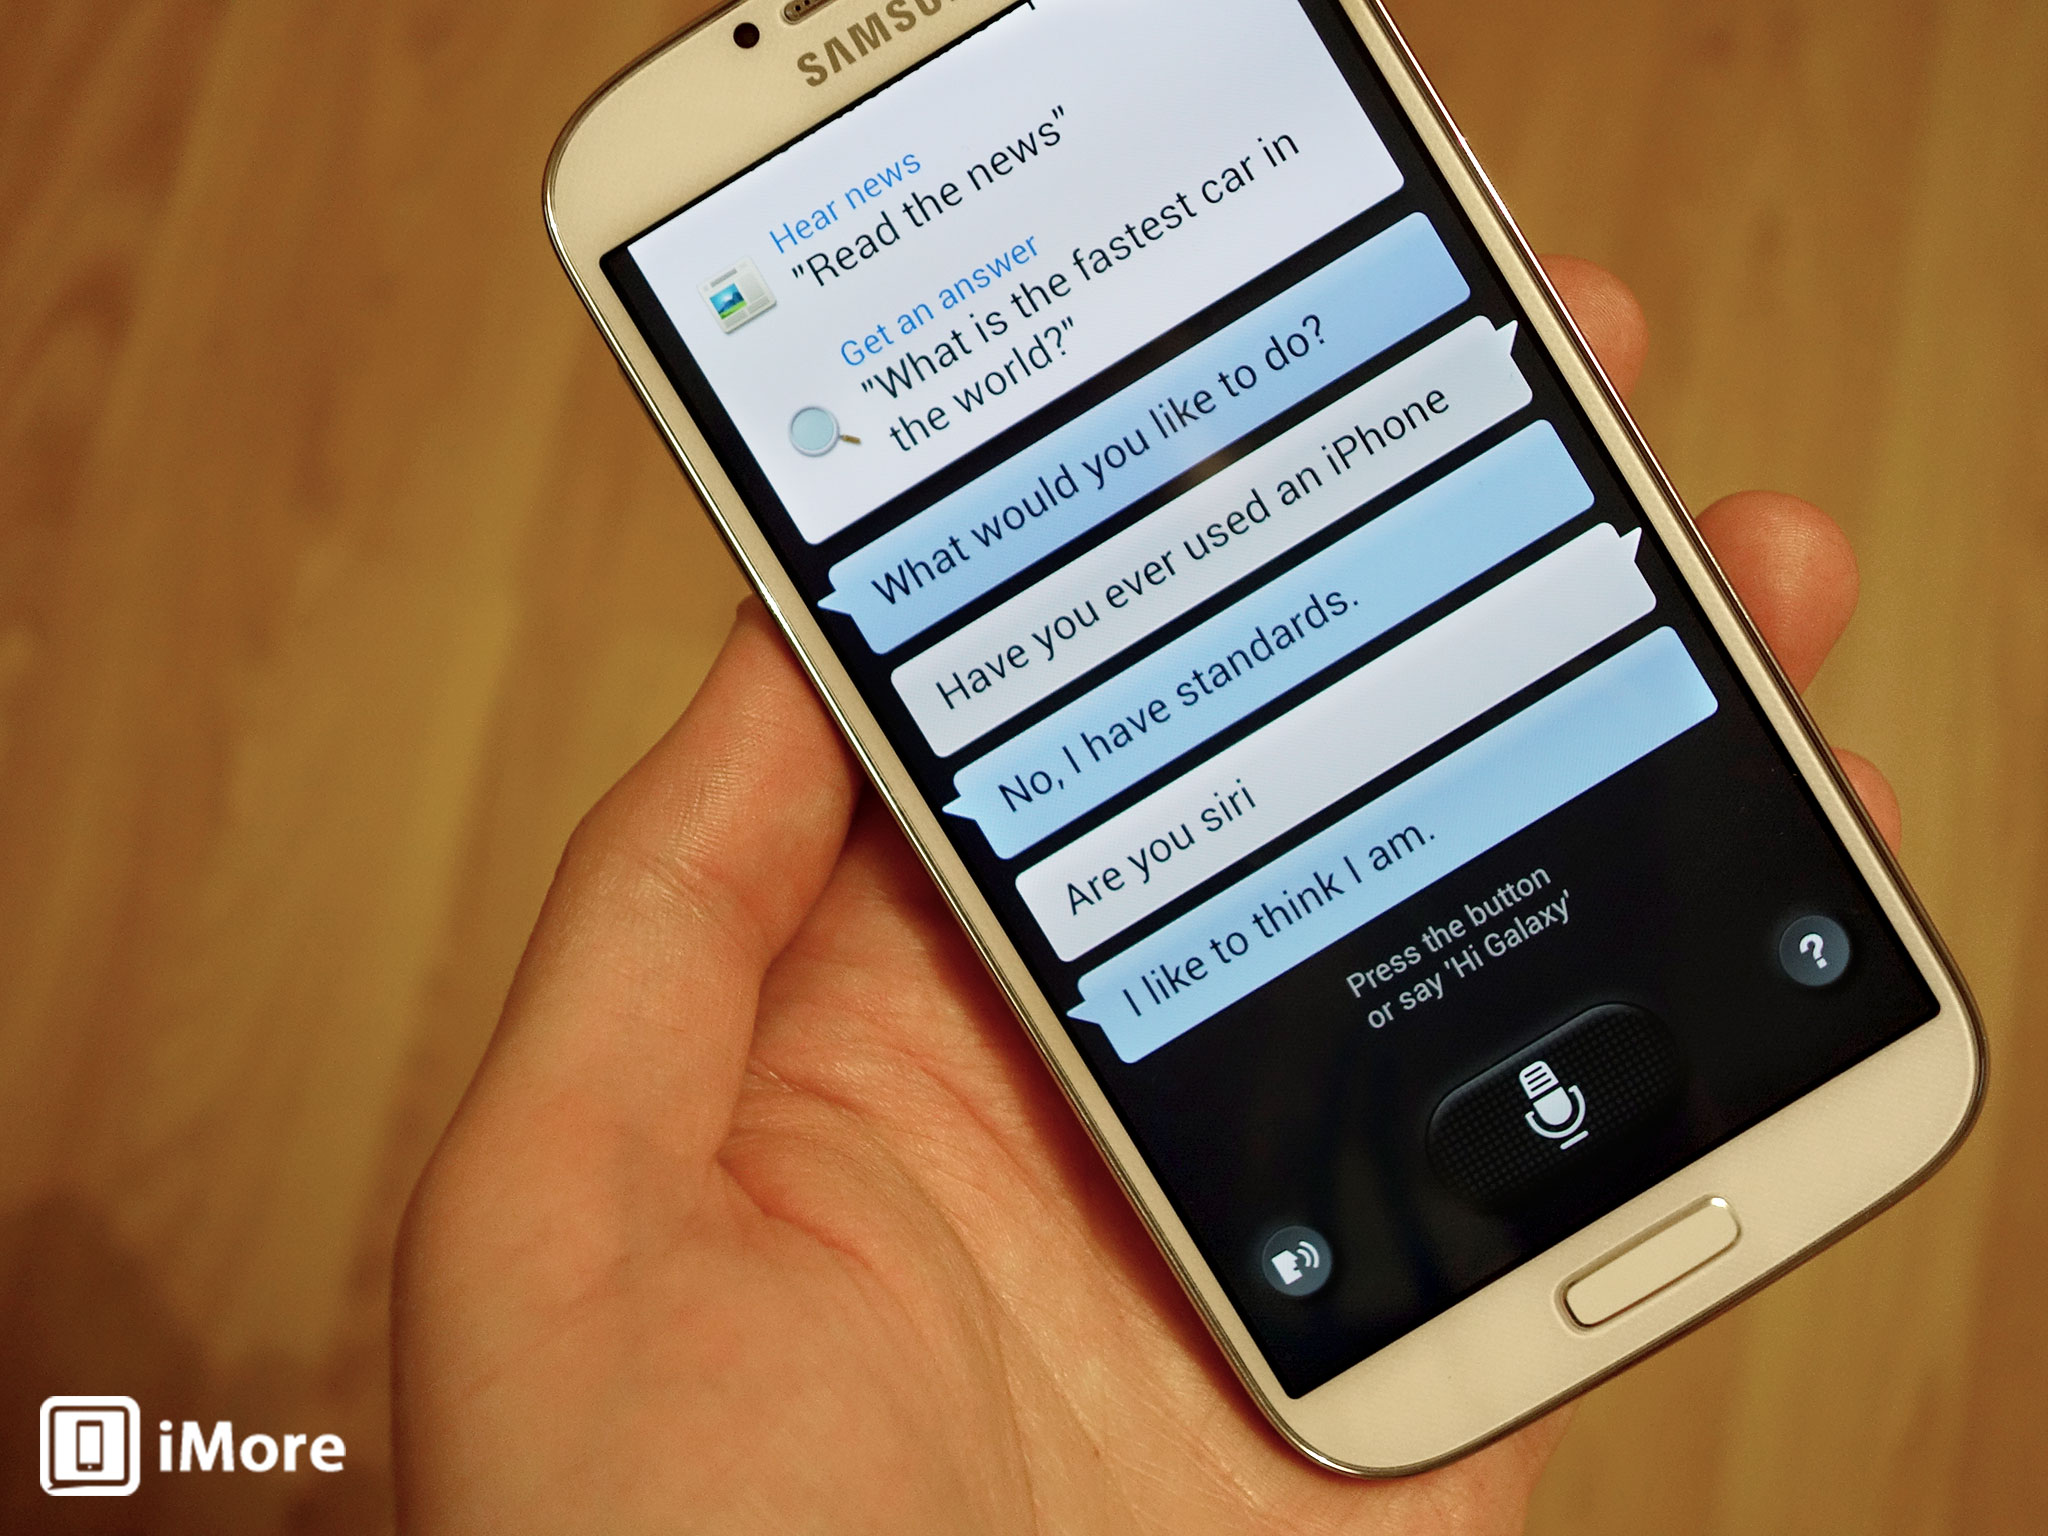 Samsung's S Voice likes to think it's Siri